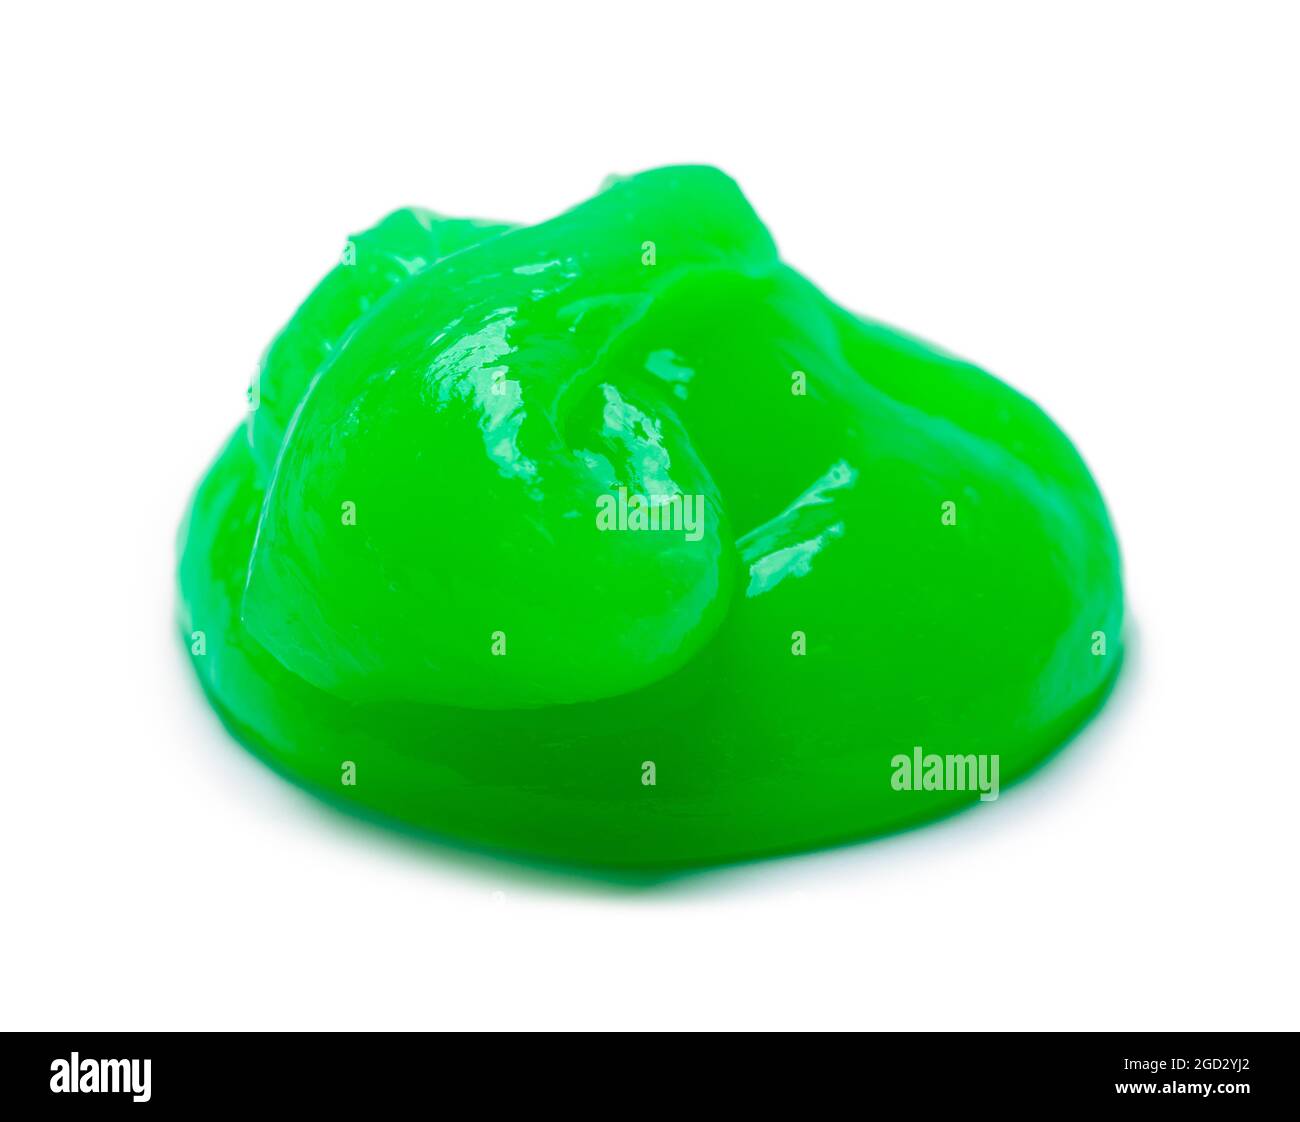 Blob of Green Slime Cut Out on White. Stock Photo